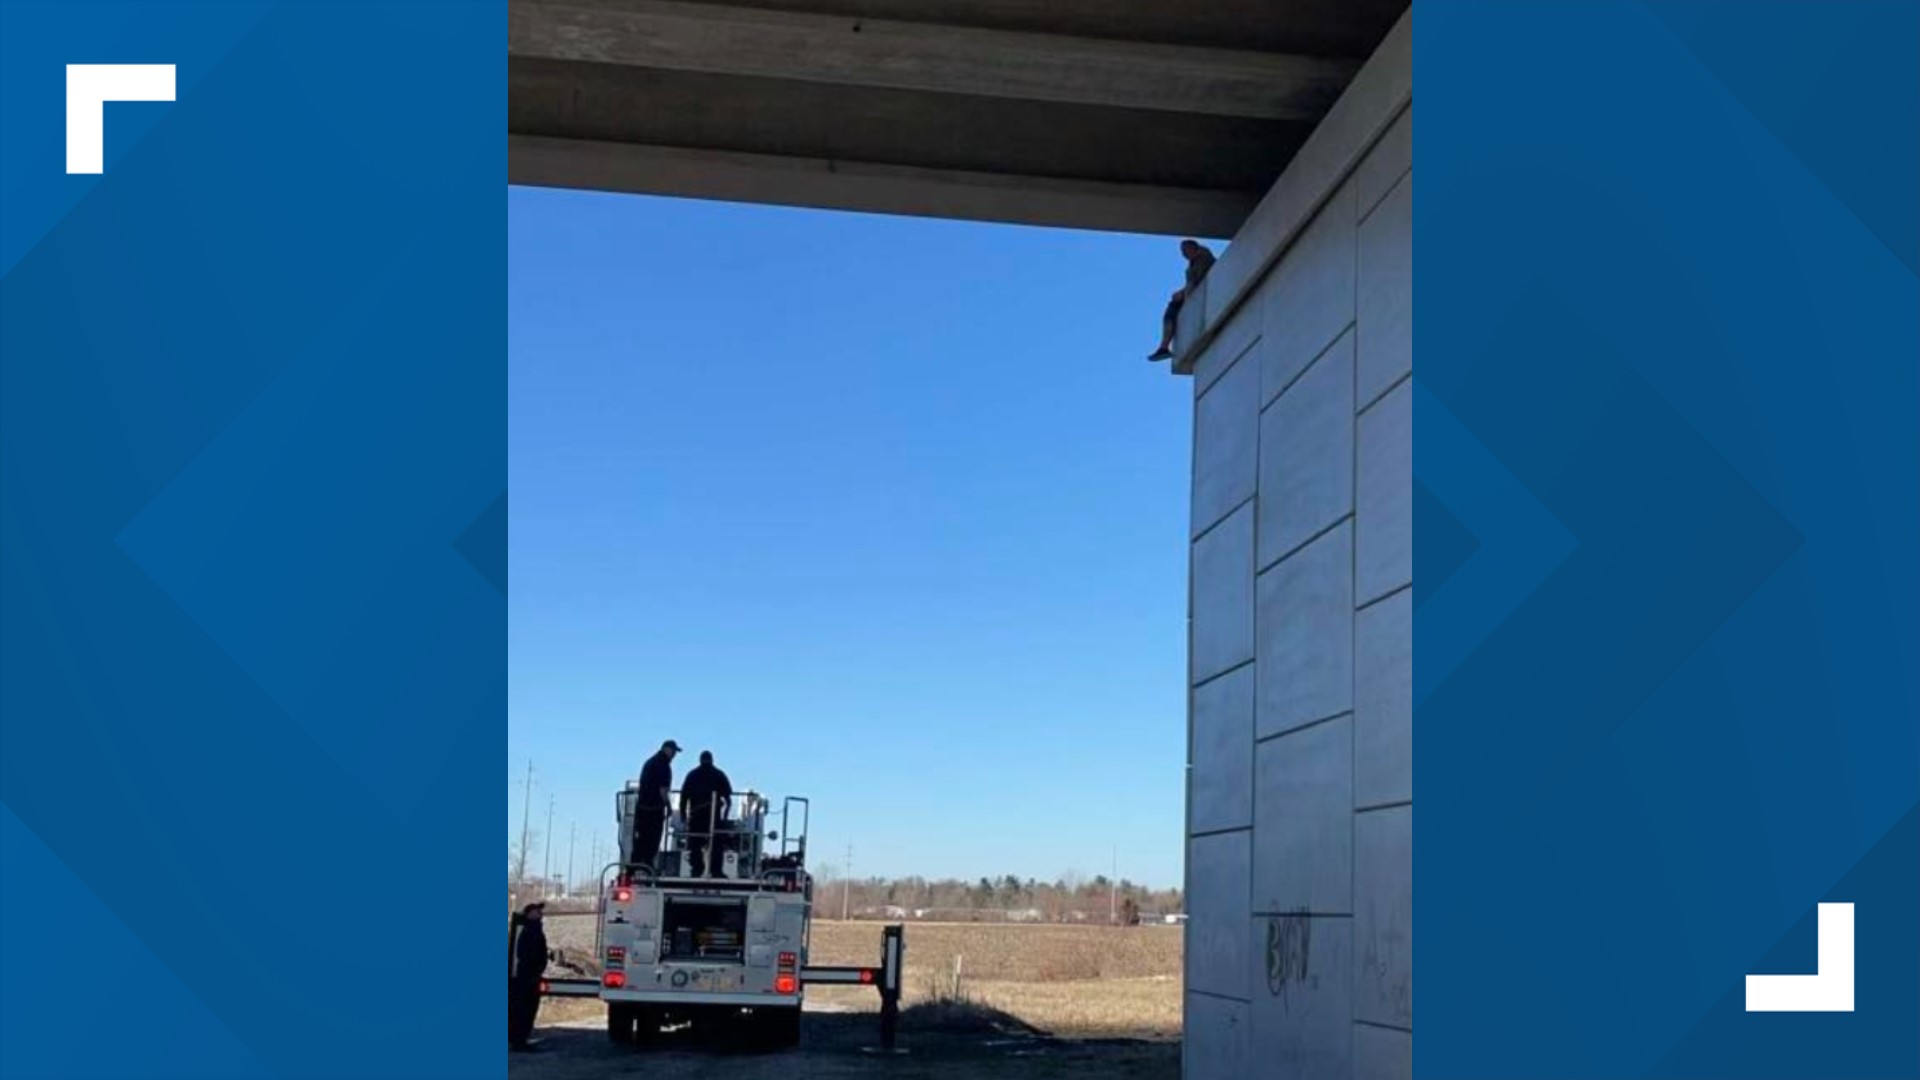 Seymour Fire Department rescued the woman after she was found sitting on ledge approximately 40 feet above the ground.